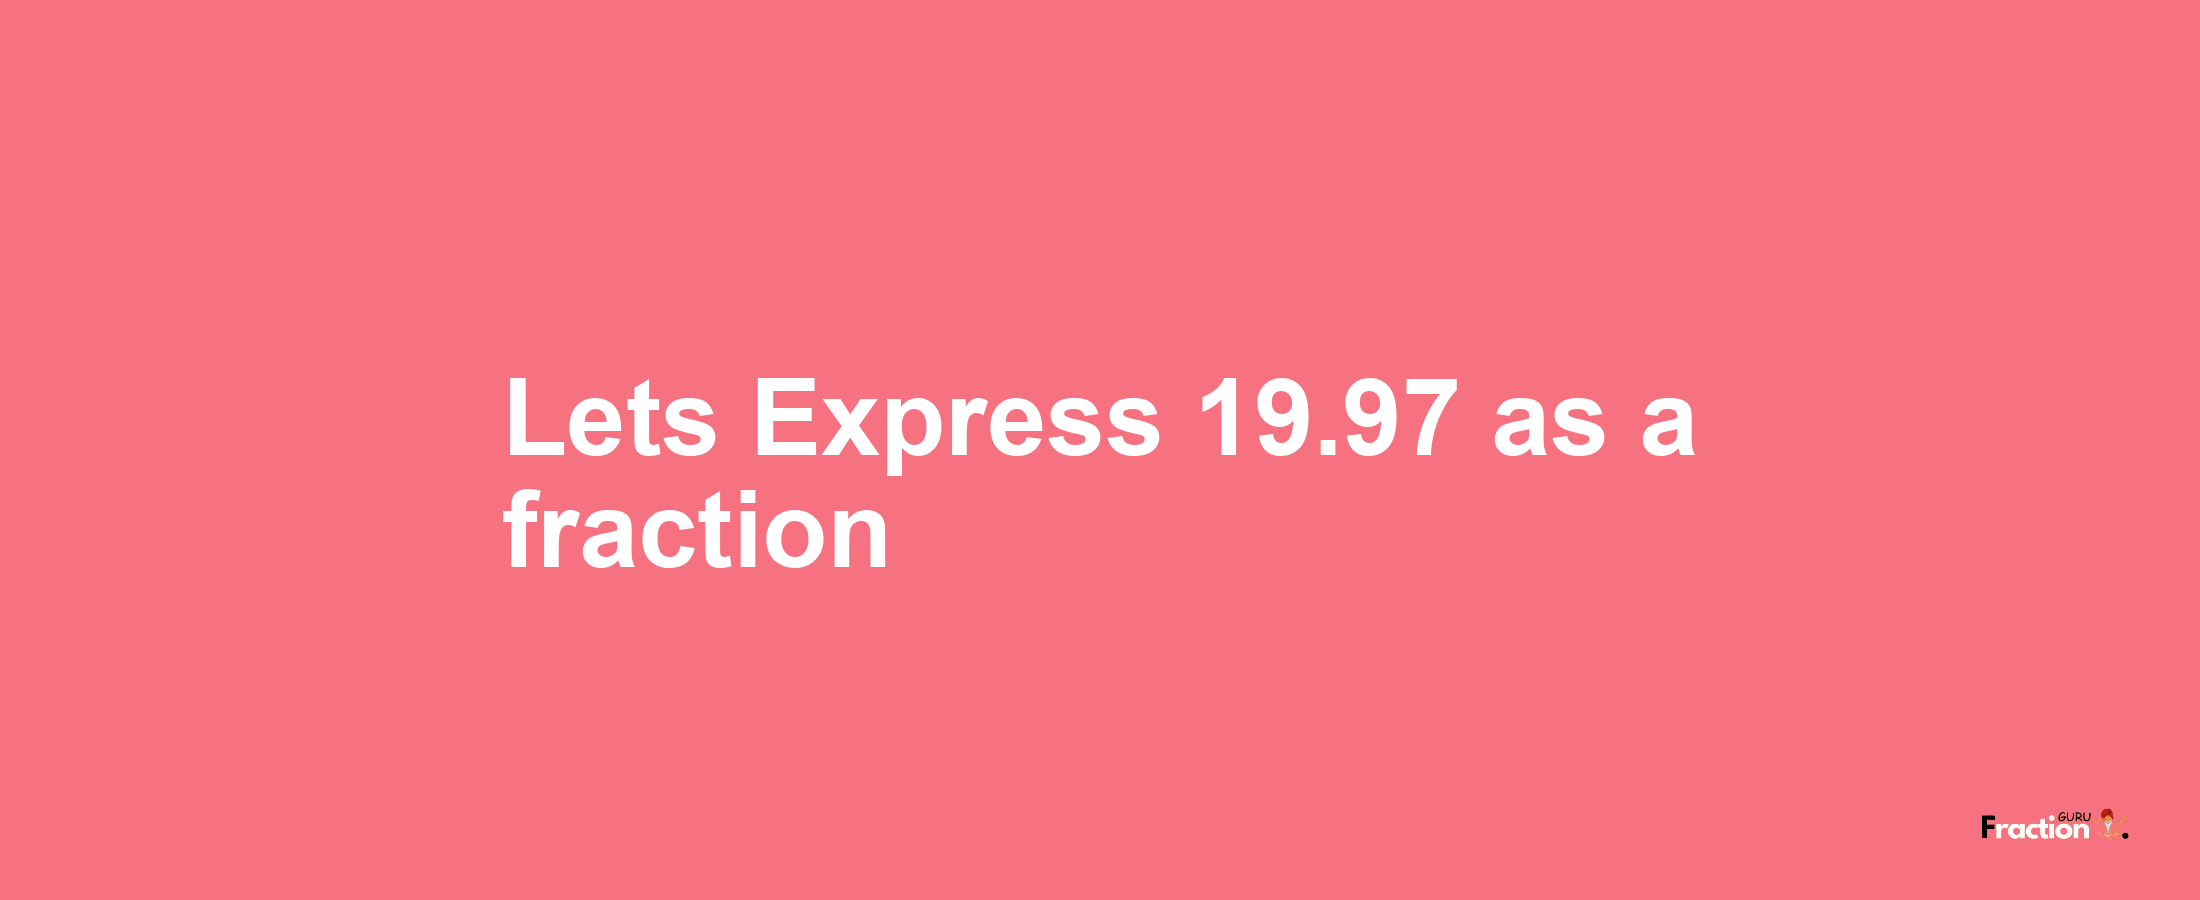 Lets Express 19.97 as afraction